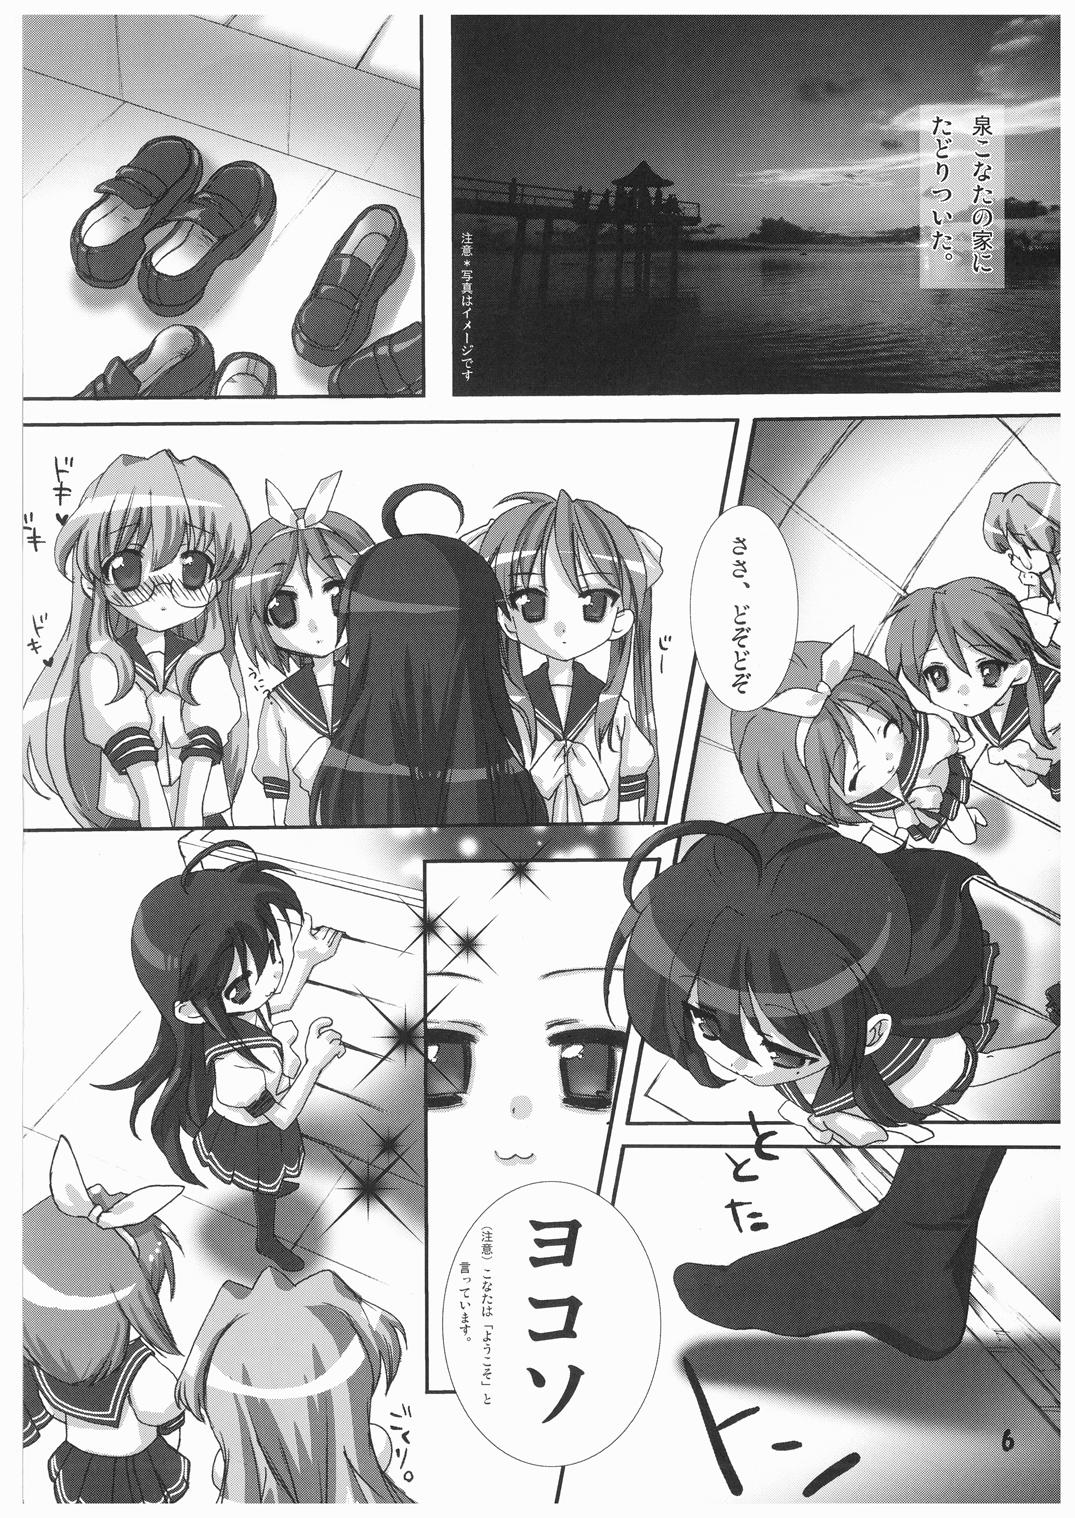 Woman Mini☆Kyun - Lucky star Ejaculations - Page 6